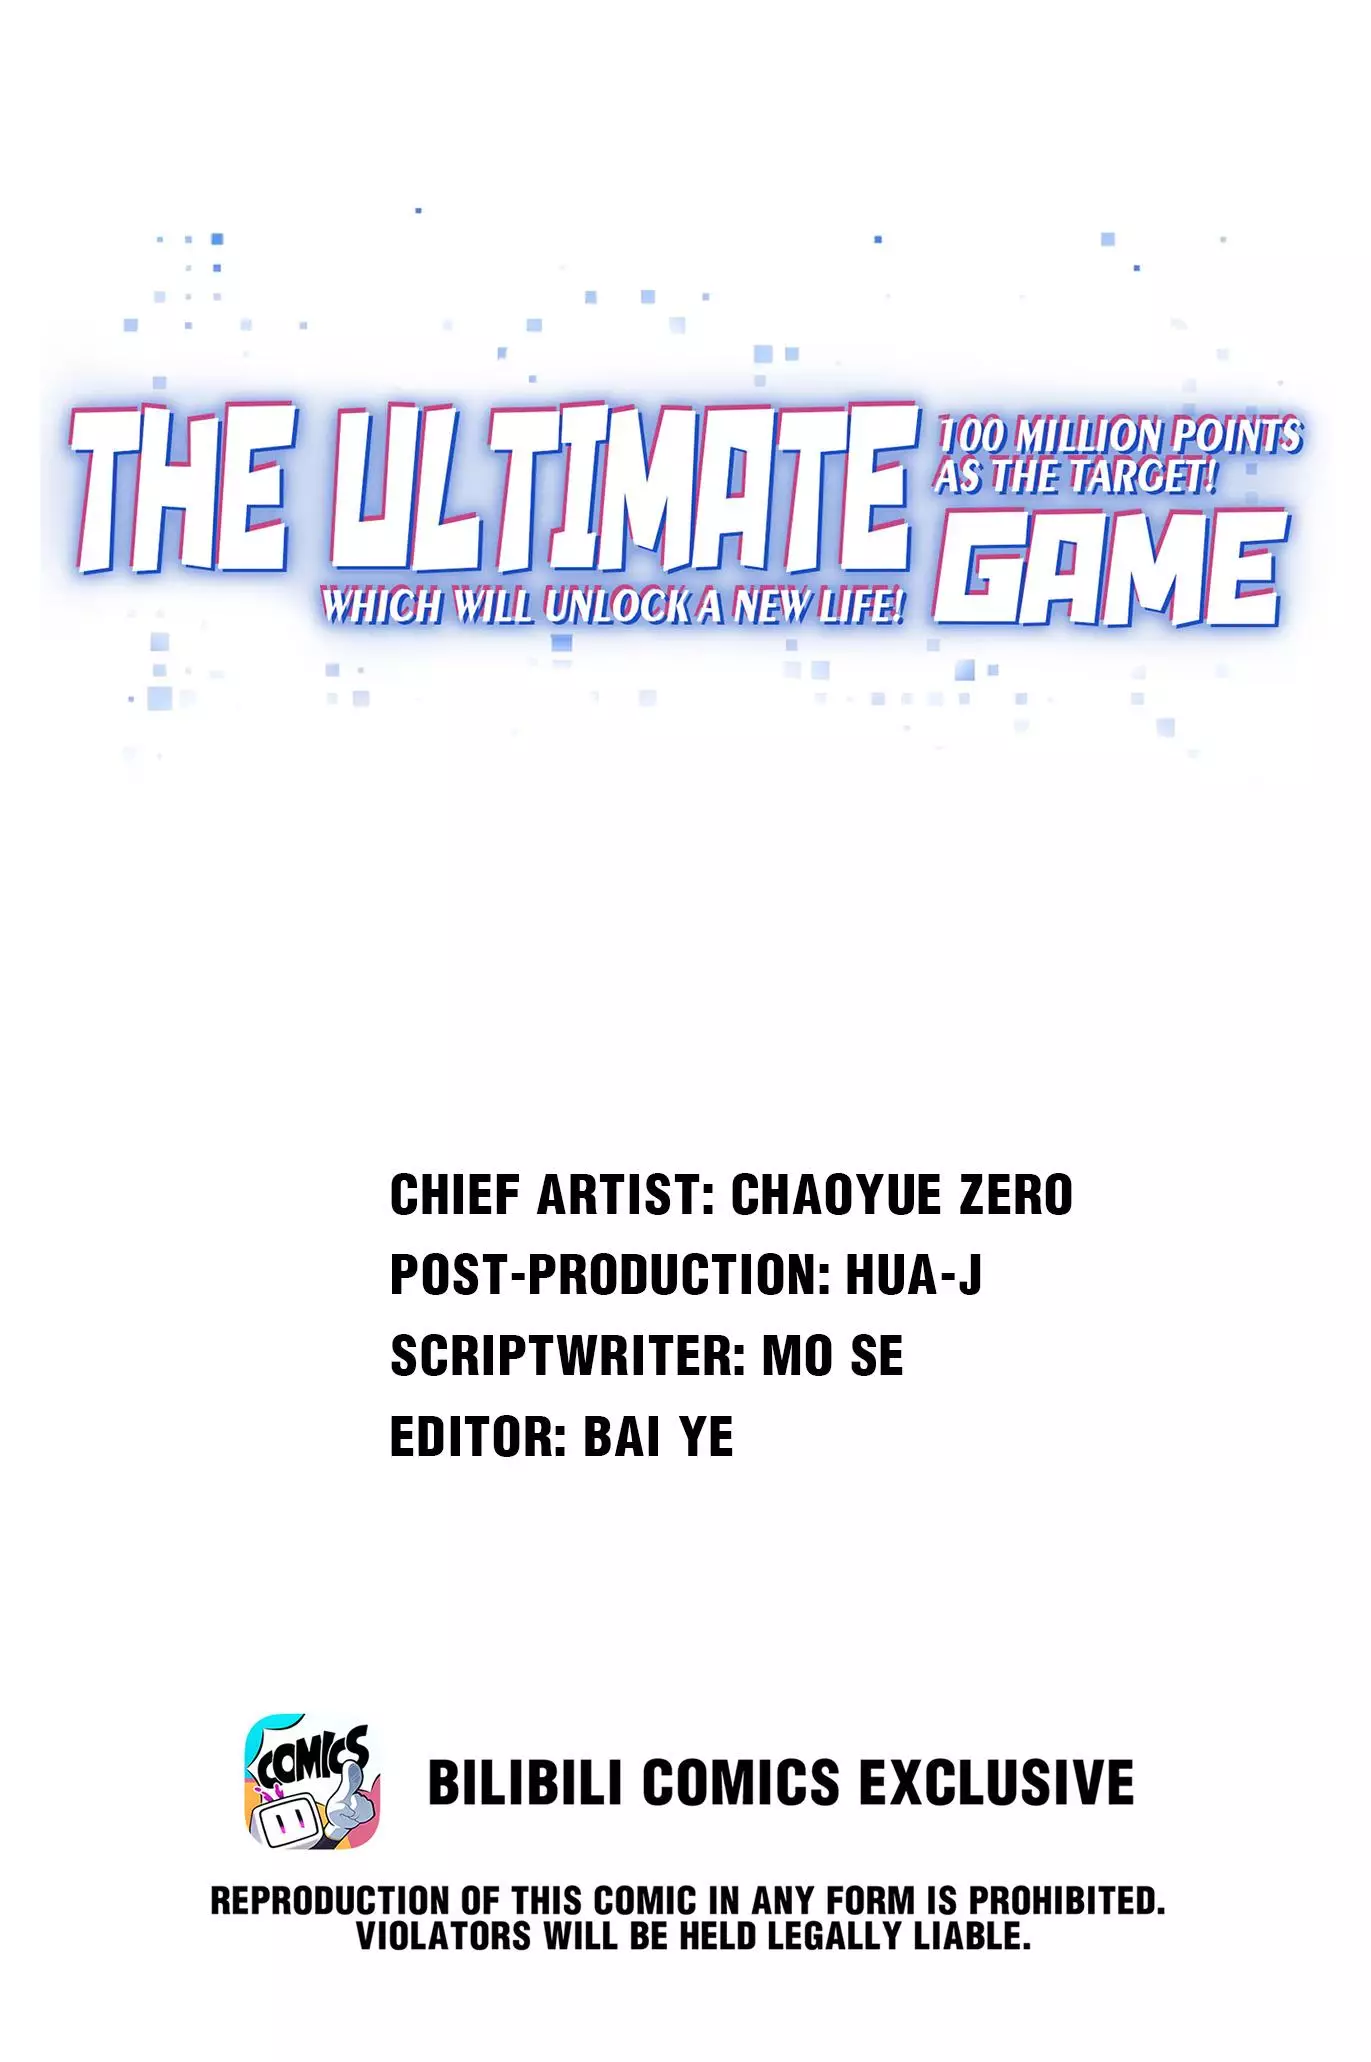 Target 1 Billion Points! Open The Ultimate Game Of Second Life! - 64 page 1-0a7e6b07